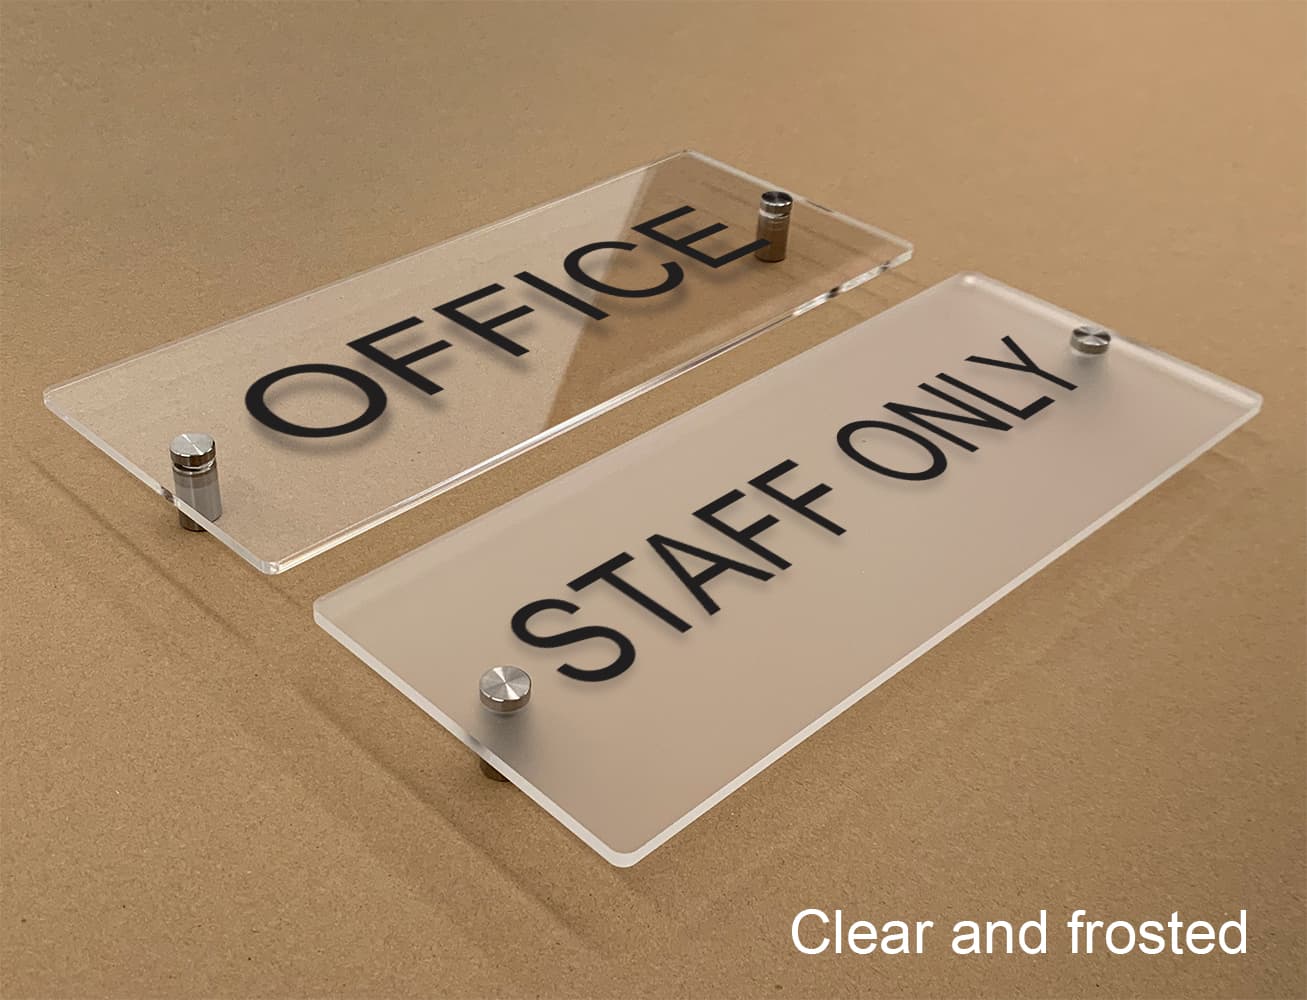 https://ausignpro.com.au/sign%20pictures/Office-signs/office-door-sign.jpg